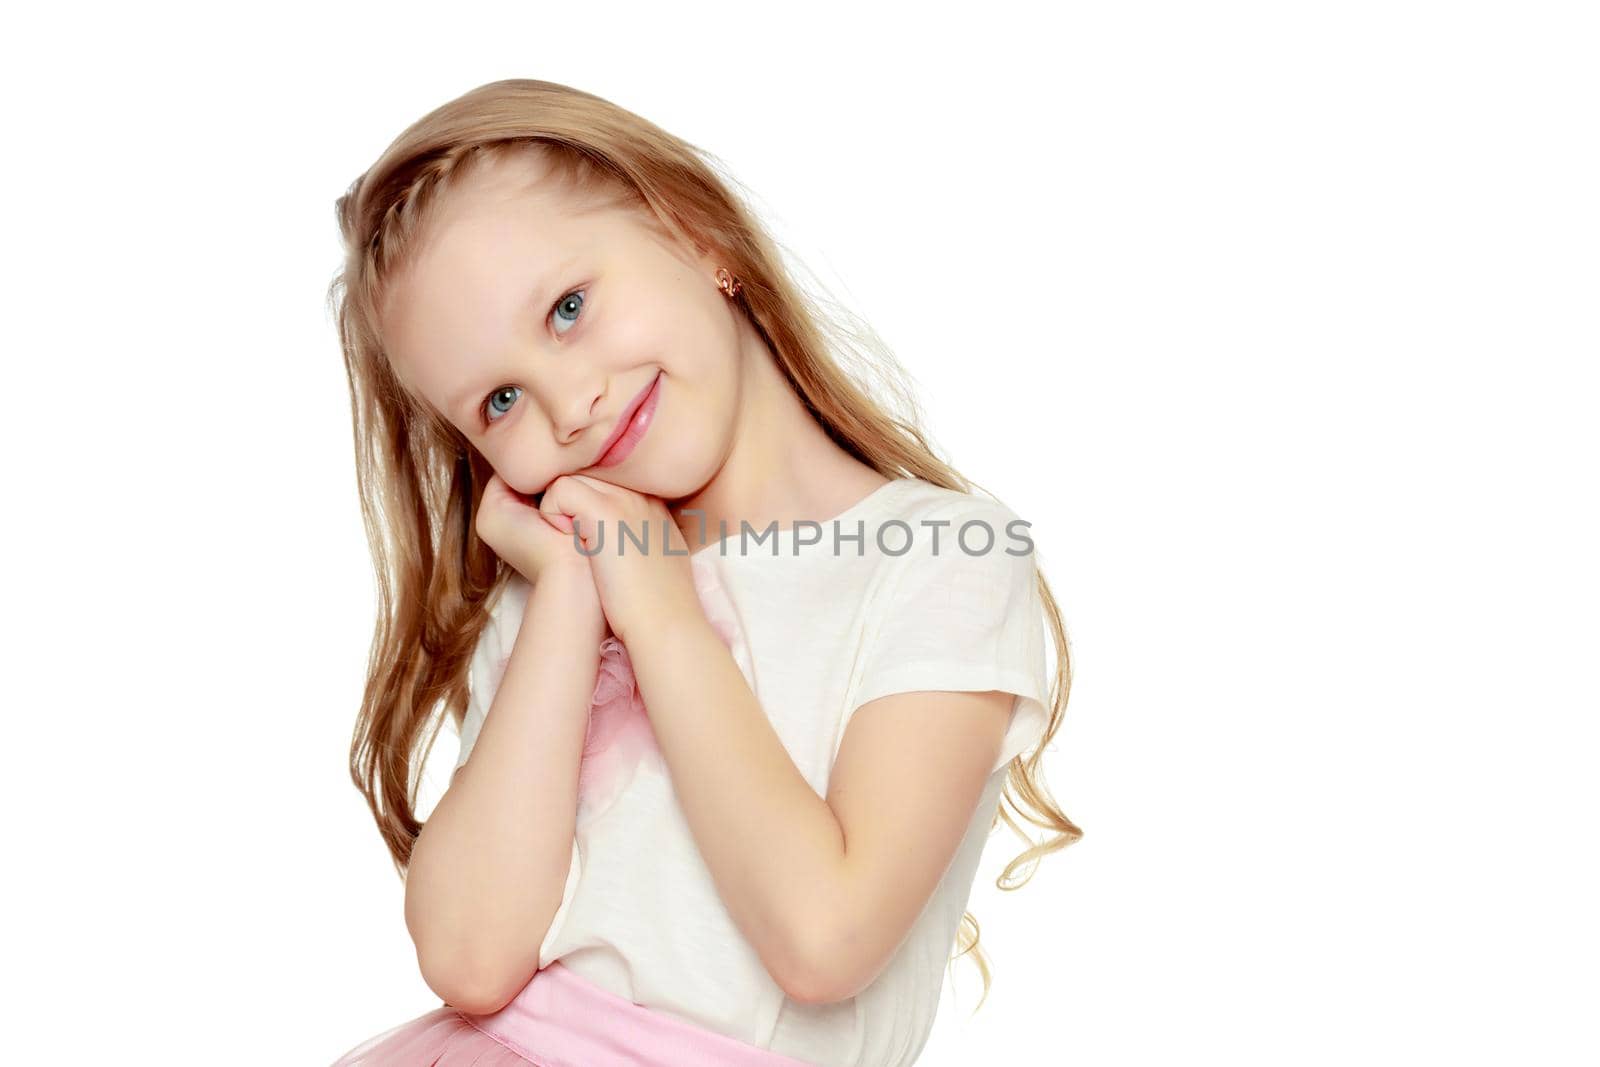 little blonde girl with long hair.In a lush short pink skirt and white T-shirt.Isolated on white background.